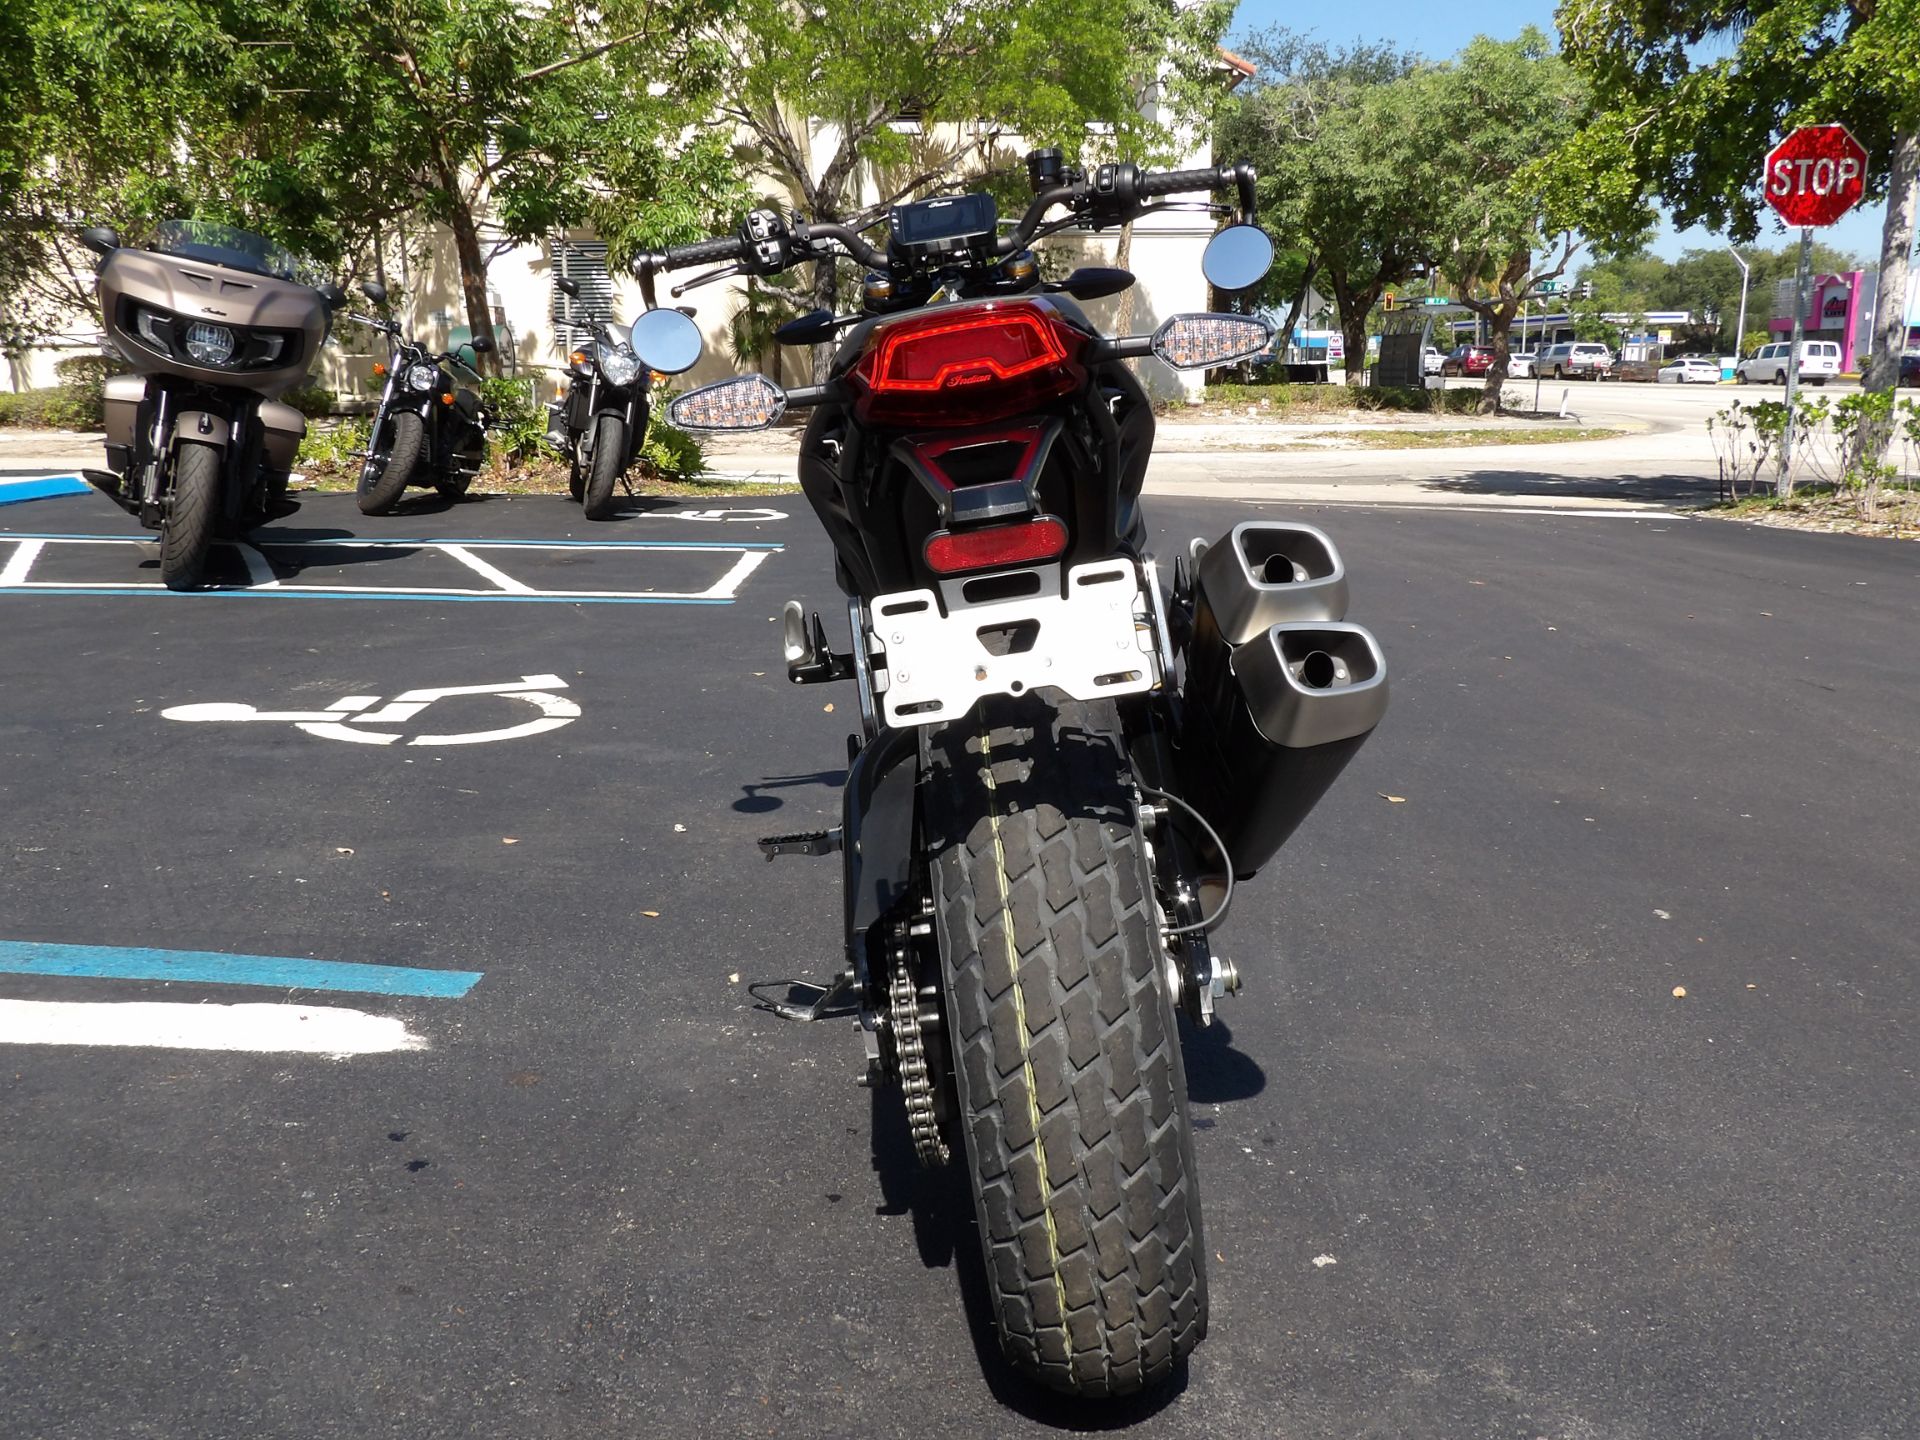 2019 Indian Motorcycle FTR™ 1200 S in Fort Lauderdale, Florida - Photo 4